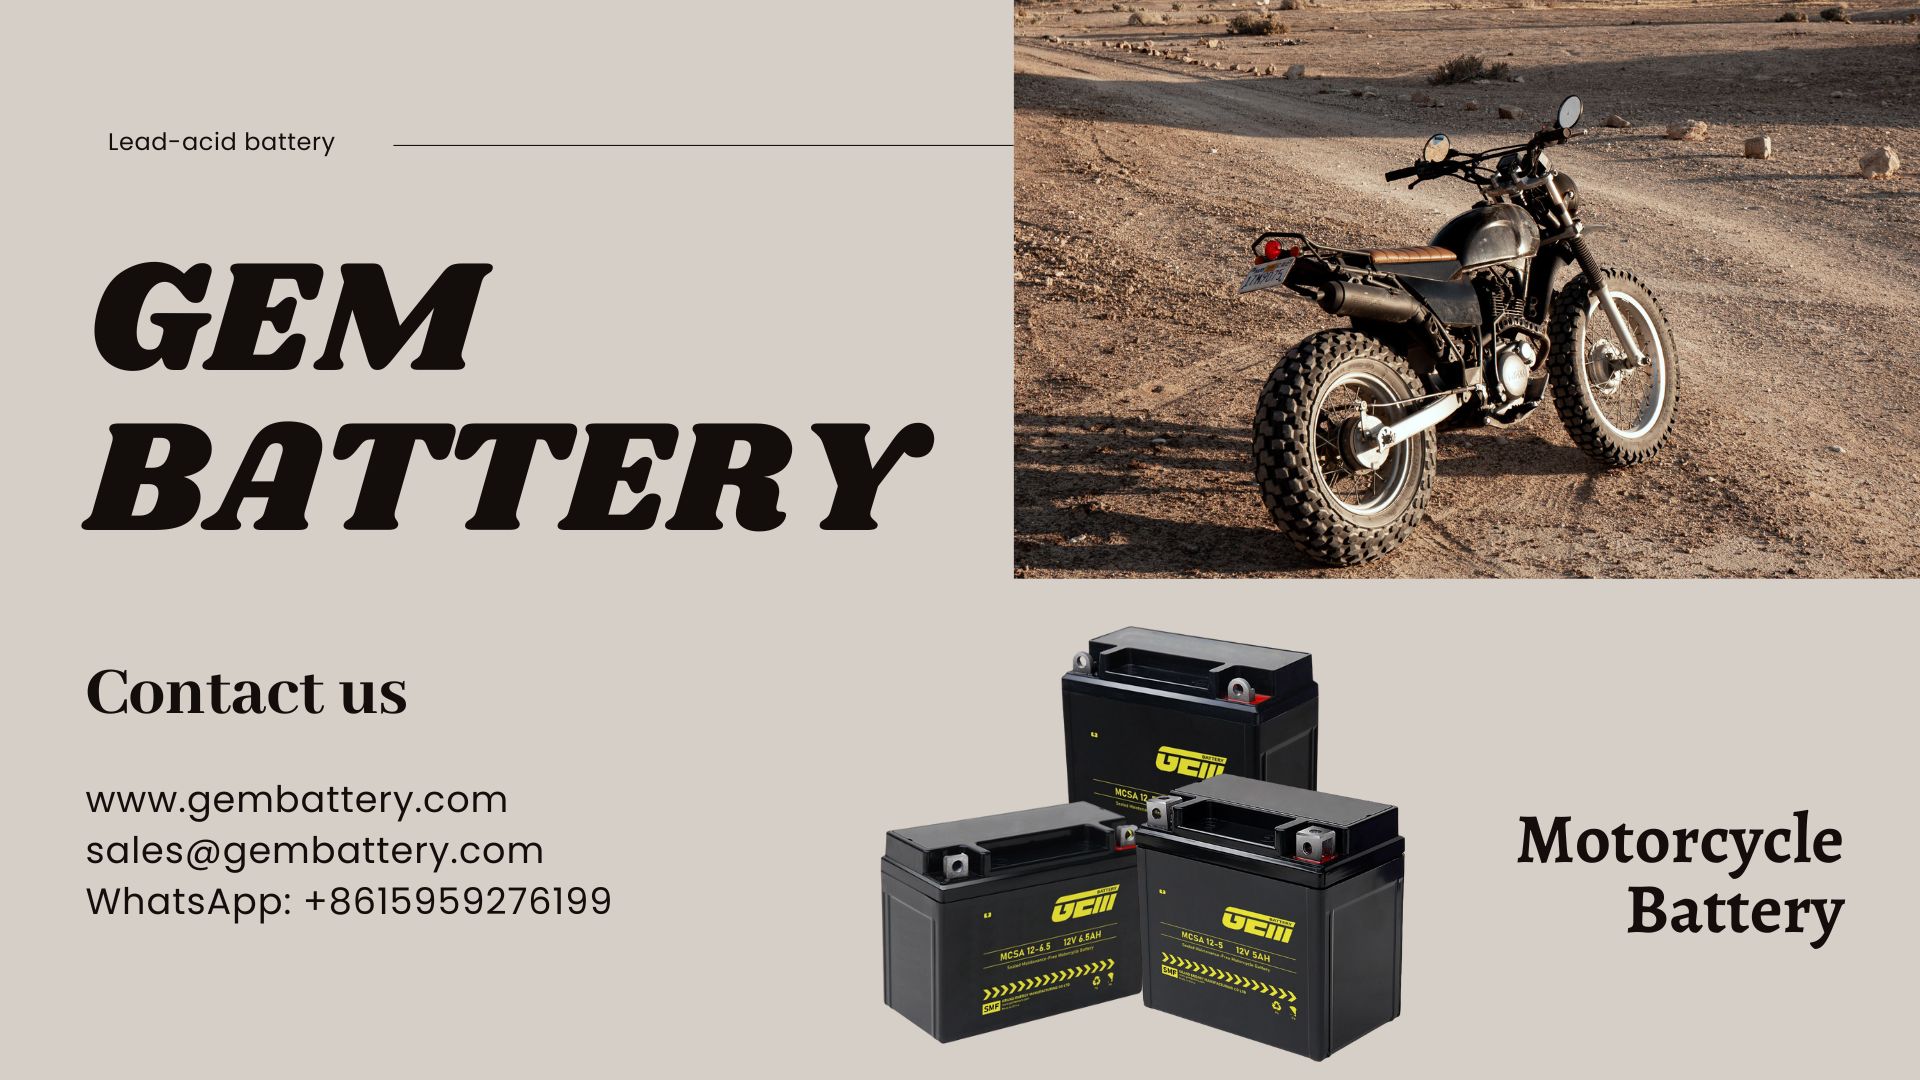 MCSA series power sports motorcycle battery